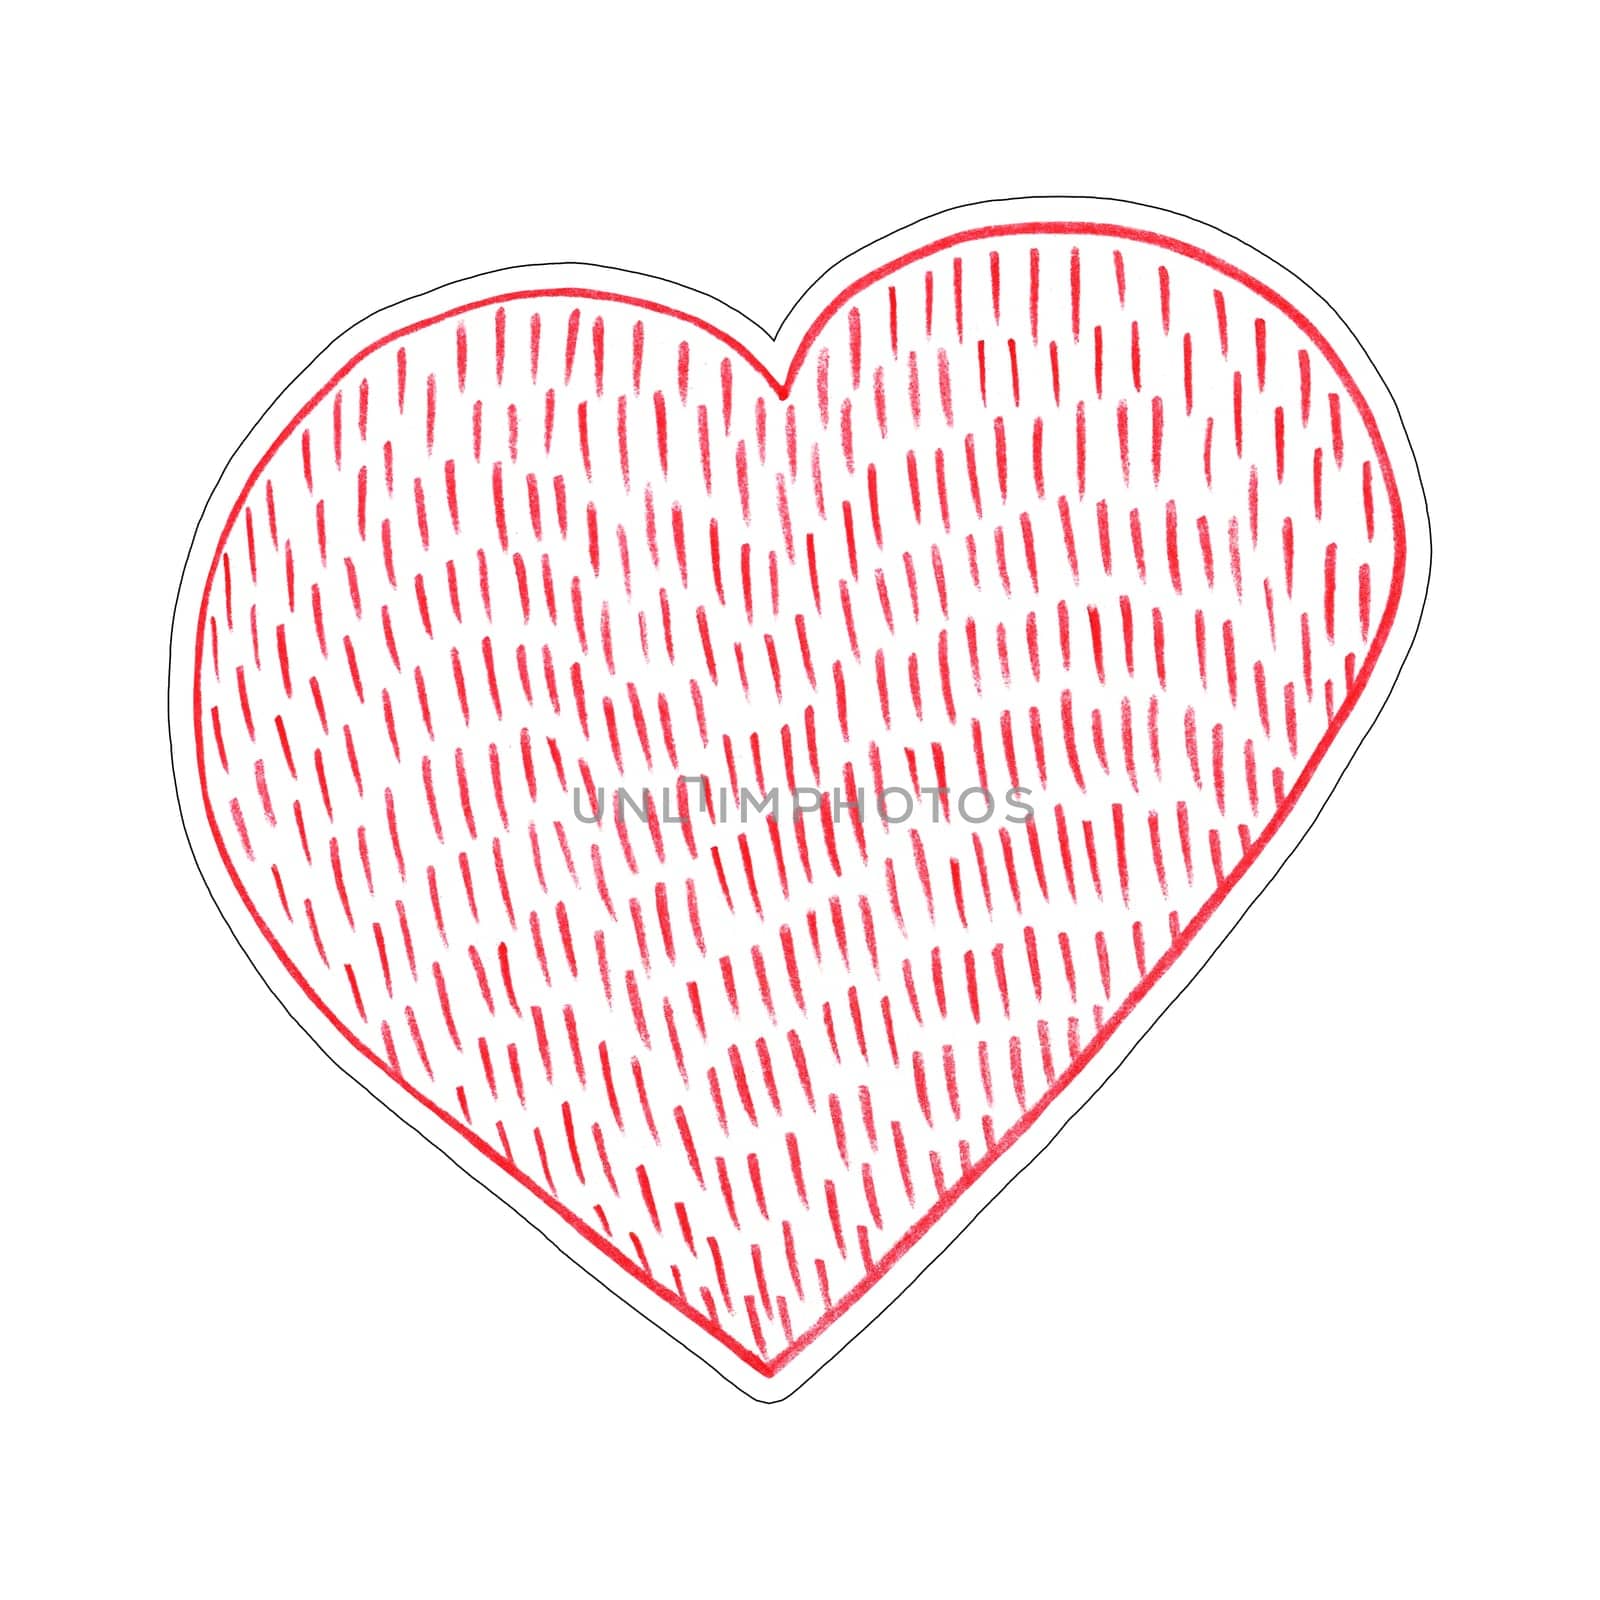 Red Heart Sticker Drawn by Colored Pencil. Heart Shape Isolated on White Background. by Rina_Dozornaya